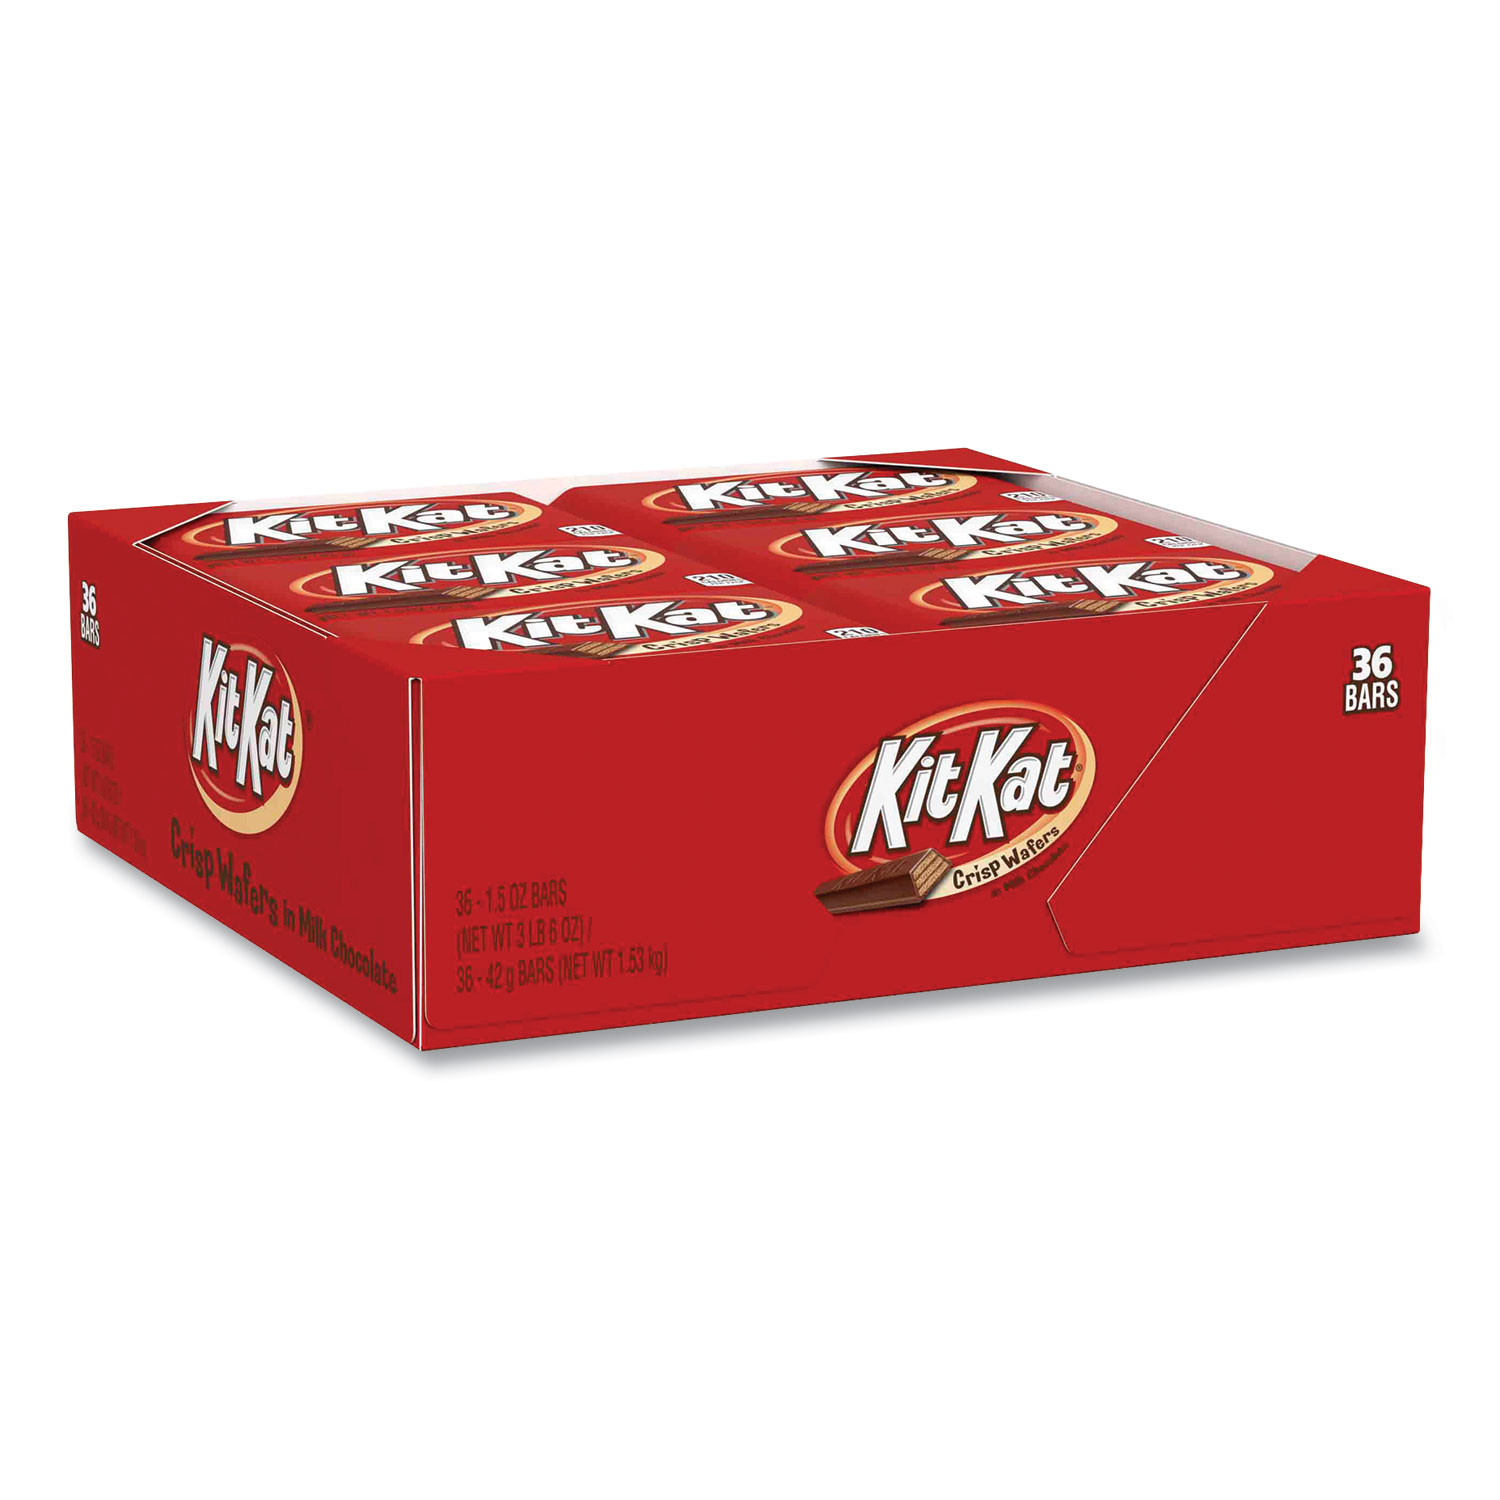  Kit Kat 24600 Wafer Bar with Milk Chocolate, 1.5 oz Bar, 36 Bars/Box, Free Delivery in 1-4 Business Days (GRR24600040) 